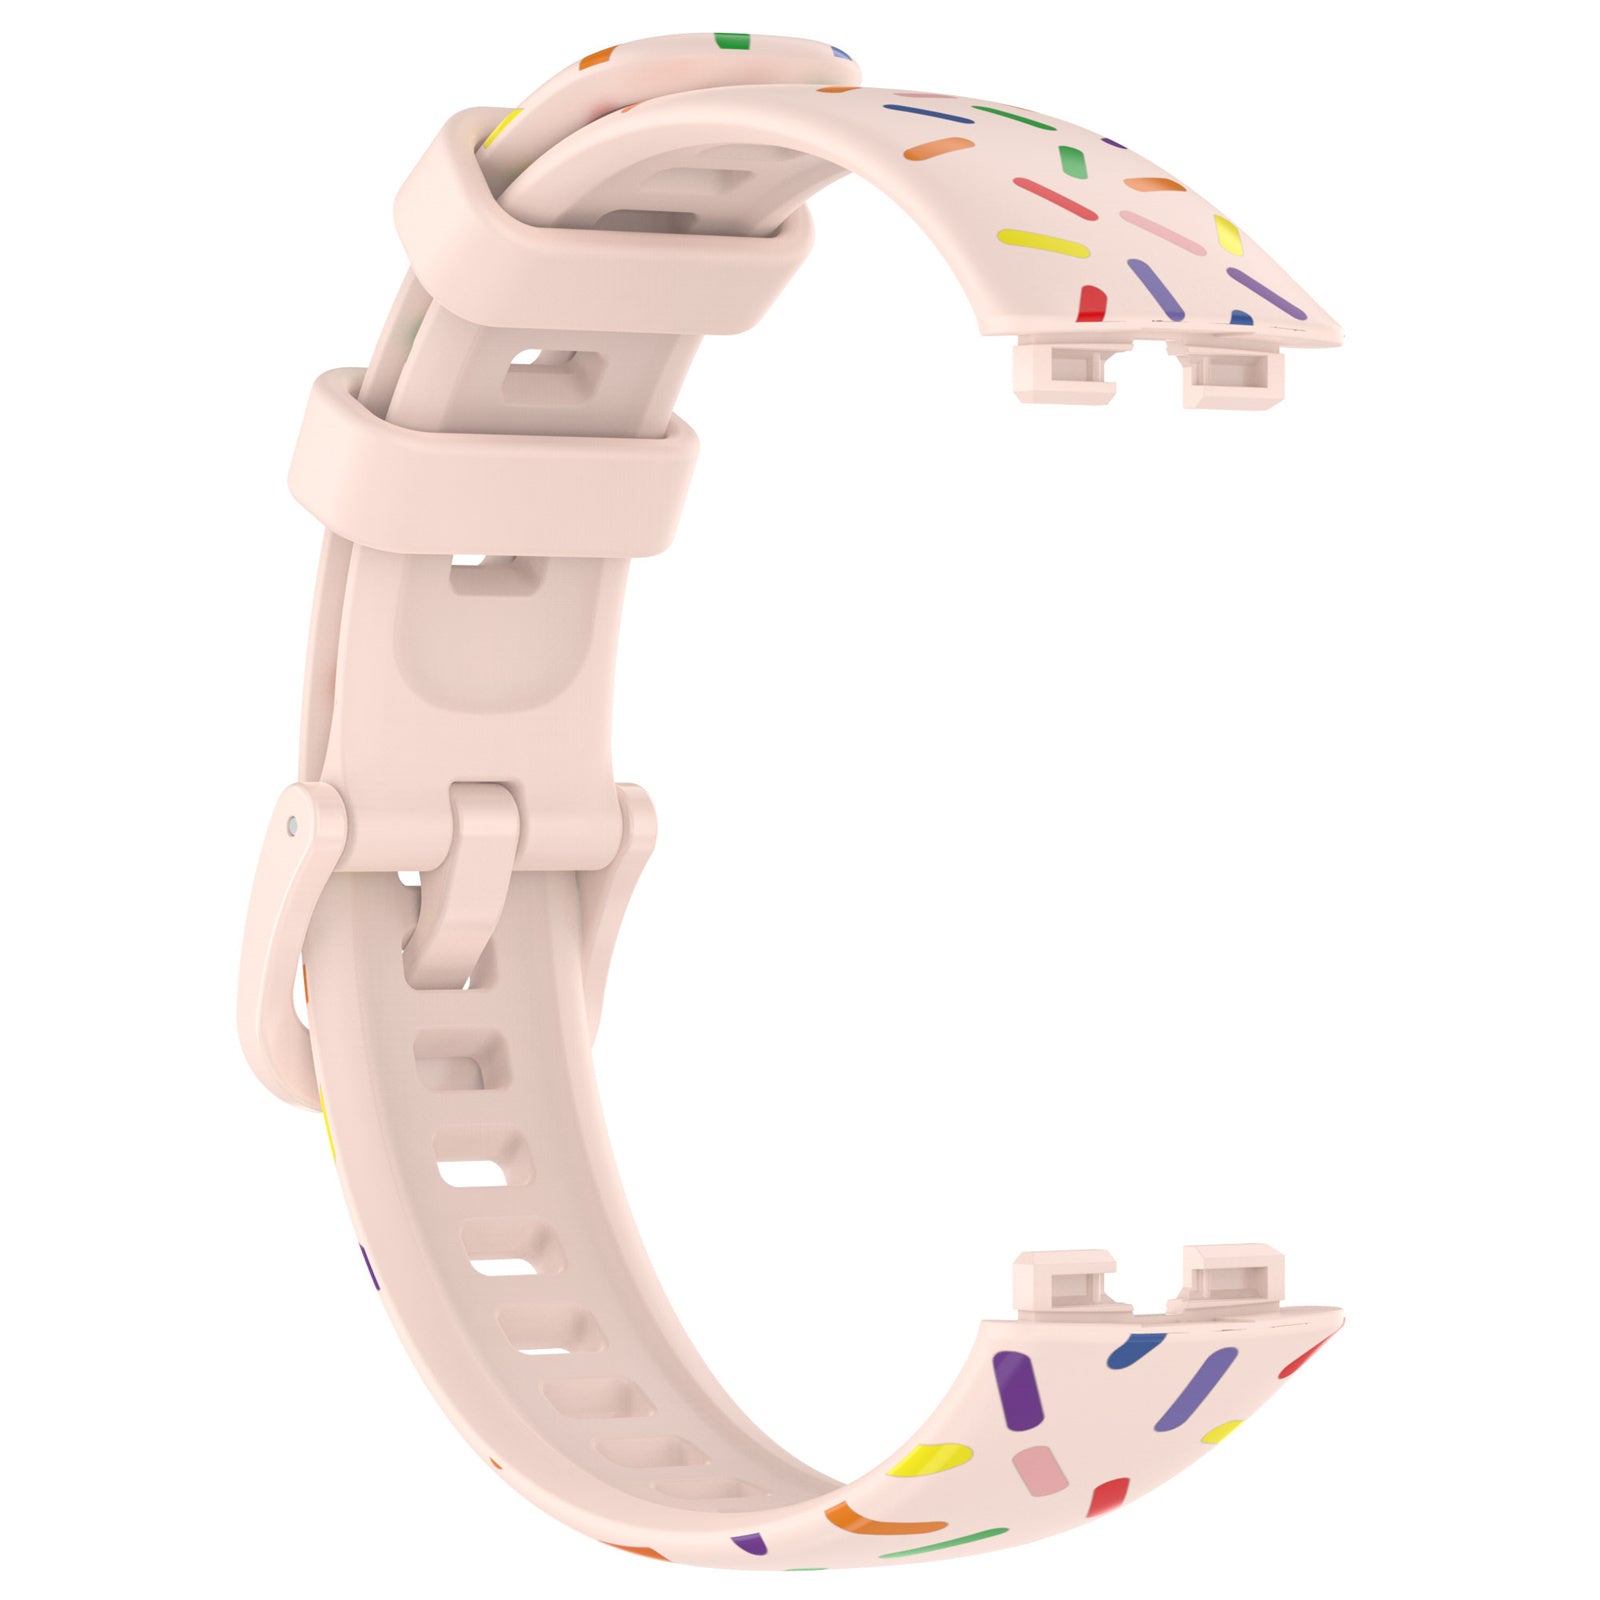 Uniqkart for Huawei Band 8 Colorful Spotted Silicone Strap Replacement Watch Band - Light Pink